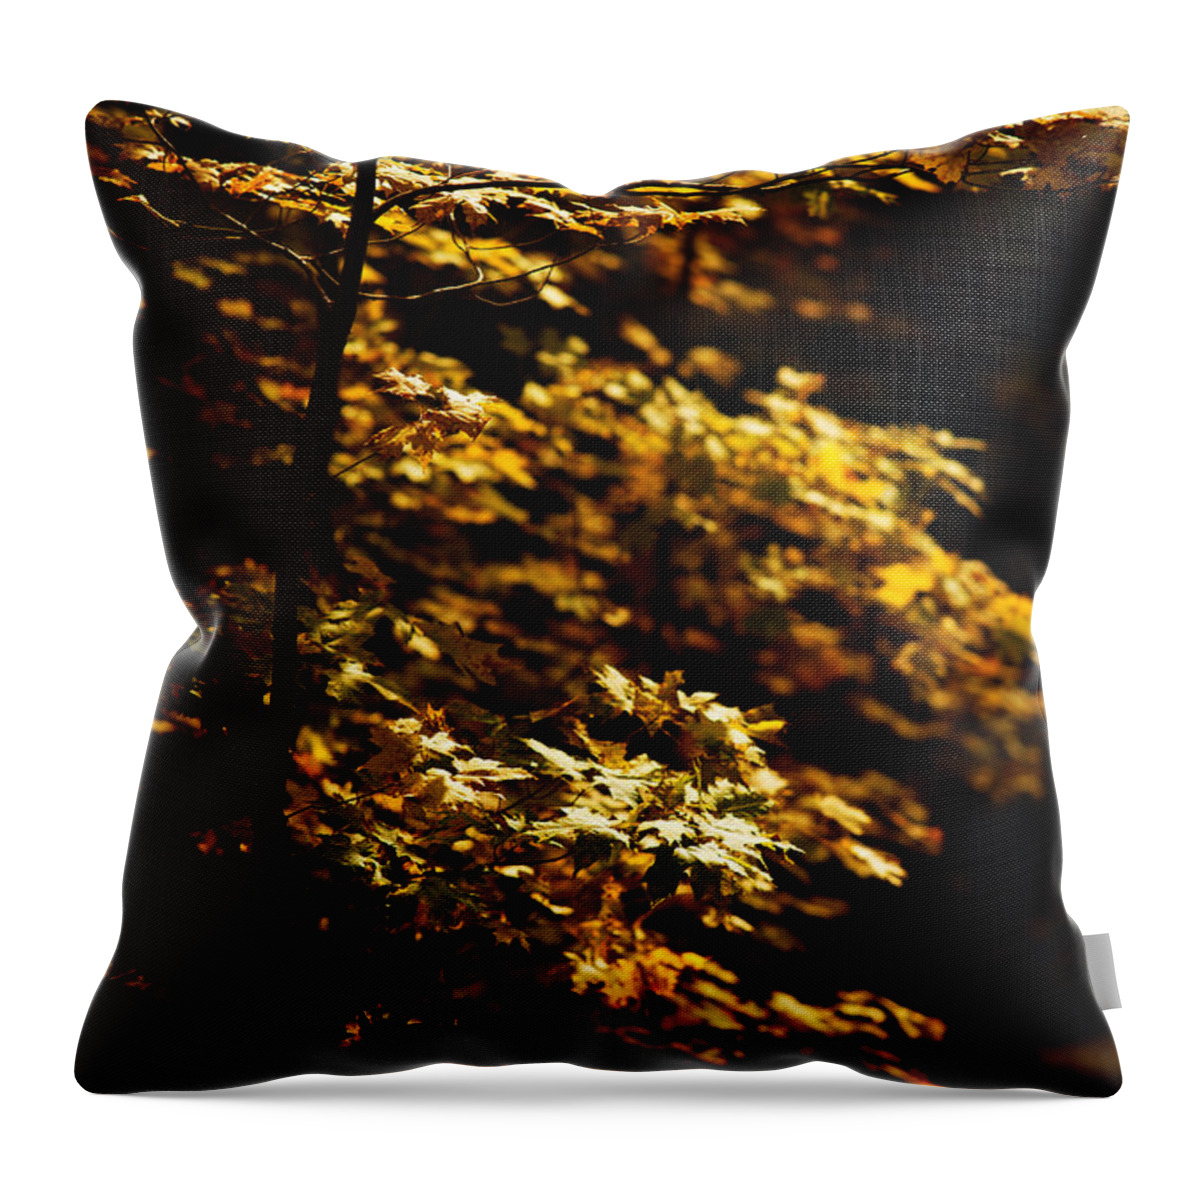 Autumn Throw Pillow featuring the photograph Hope Leaves by Linda Shafer